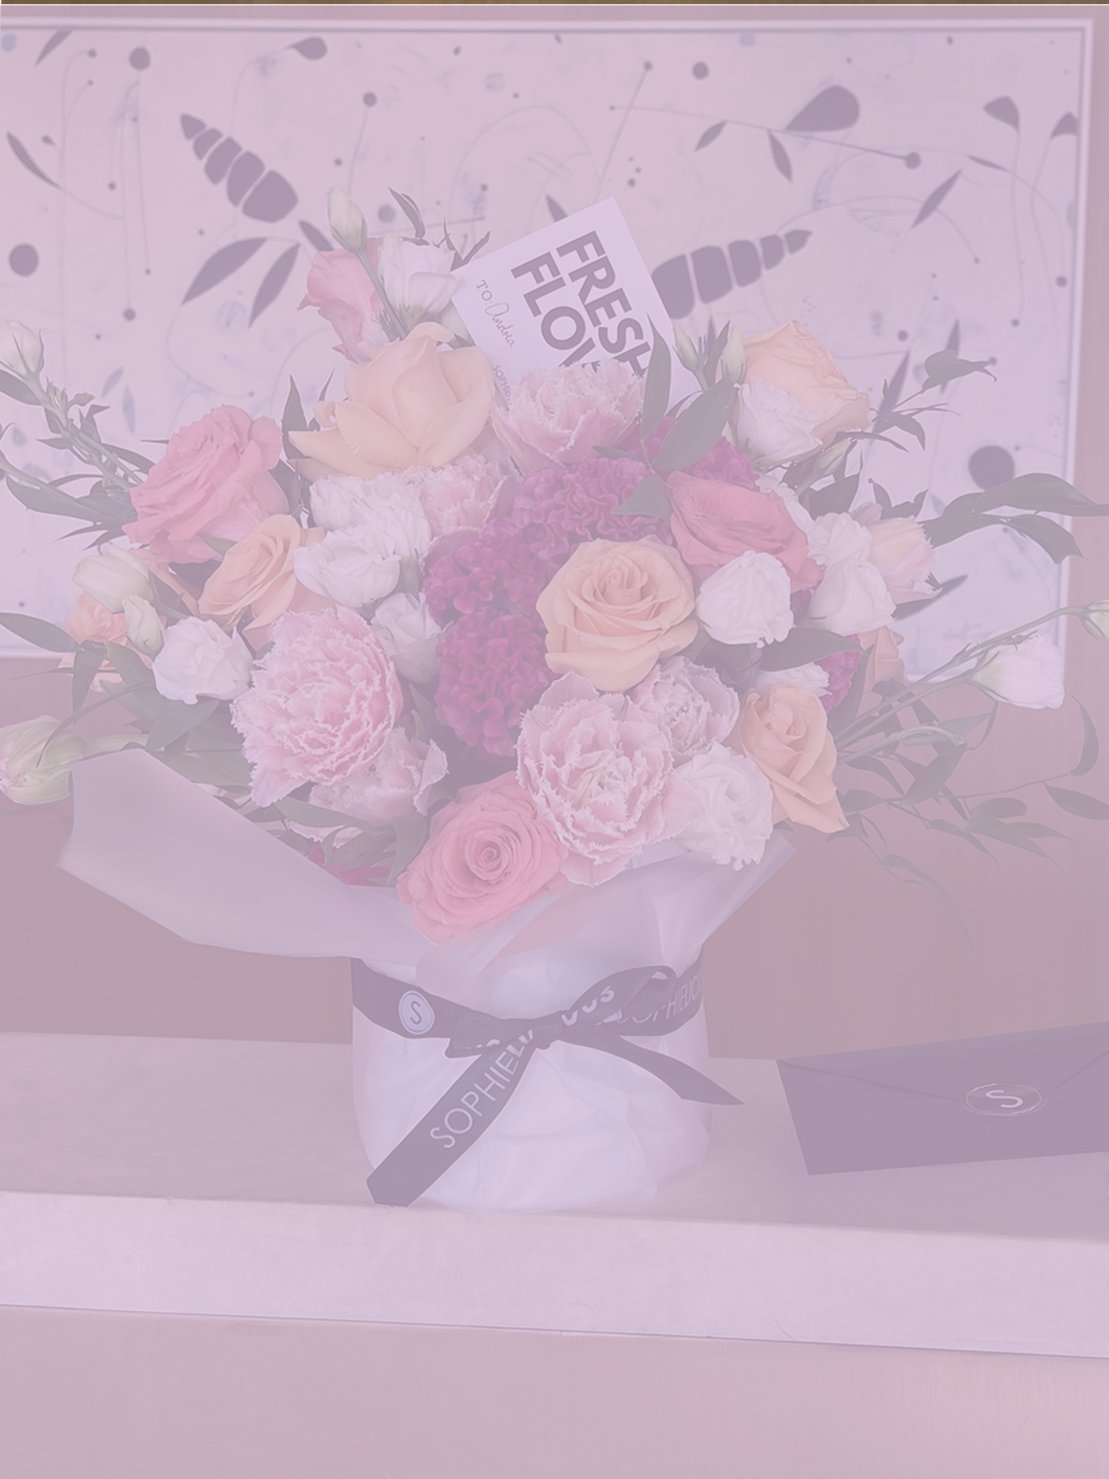 Bringing Blooms to Your Doorstep! Discover the freshest flower delivery in Edgewater, New Jersey and Manhattan, New York. Handpicked arrangements for any occasion. Order now for same-day delivery and brighten someone's day with the perfect bouquet